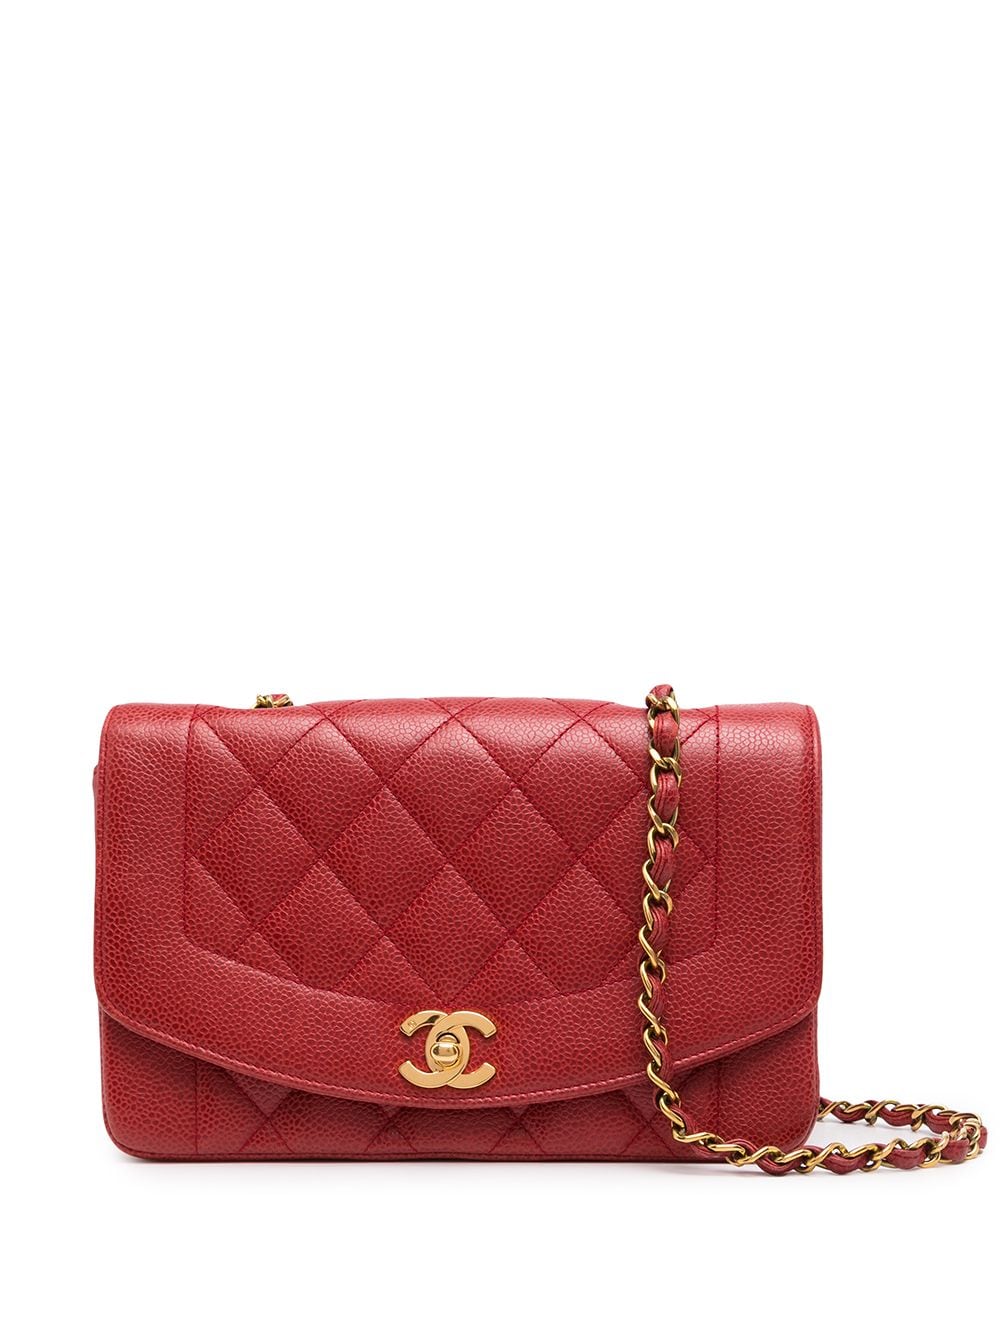 CHANEL Pre-Owned 1992 Diana CC Umhängetasche - Rot von CHANEL Pre-Owned